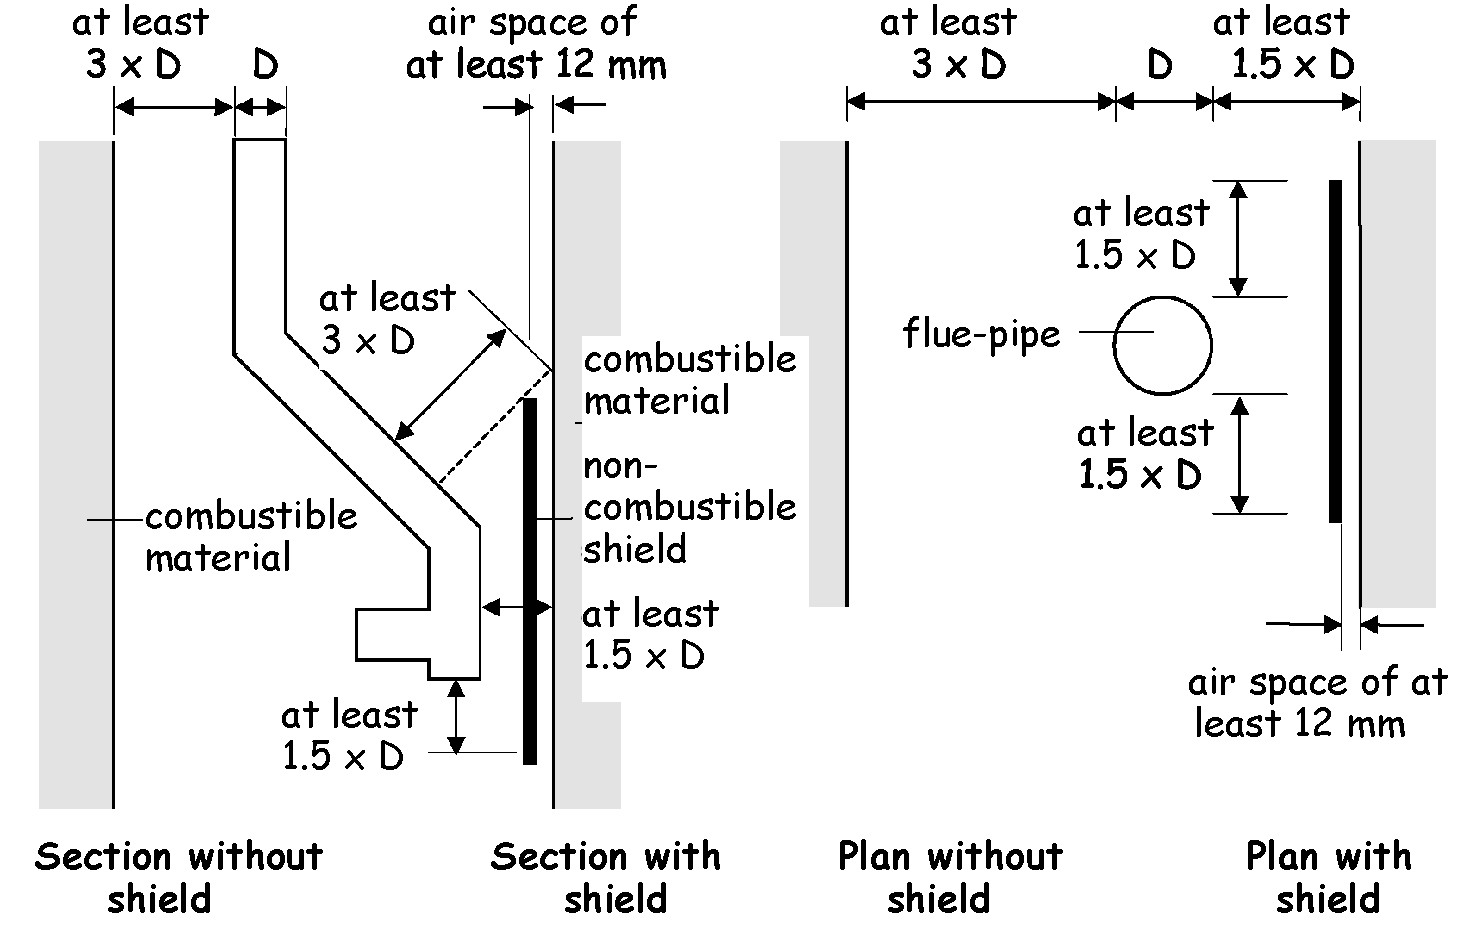 Relationship of flue-pipes to combustible material